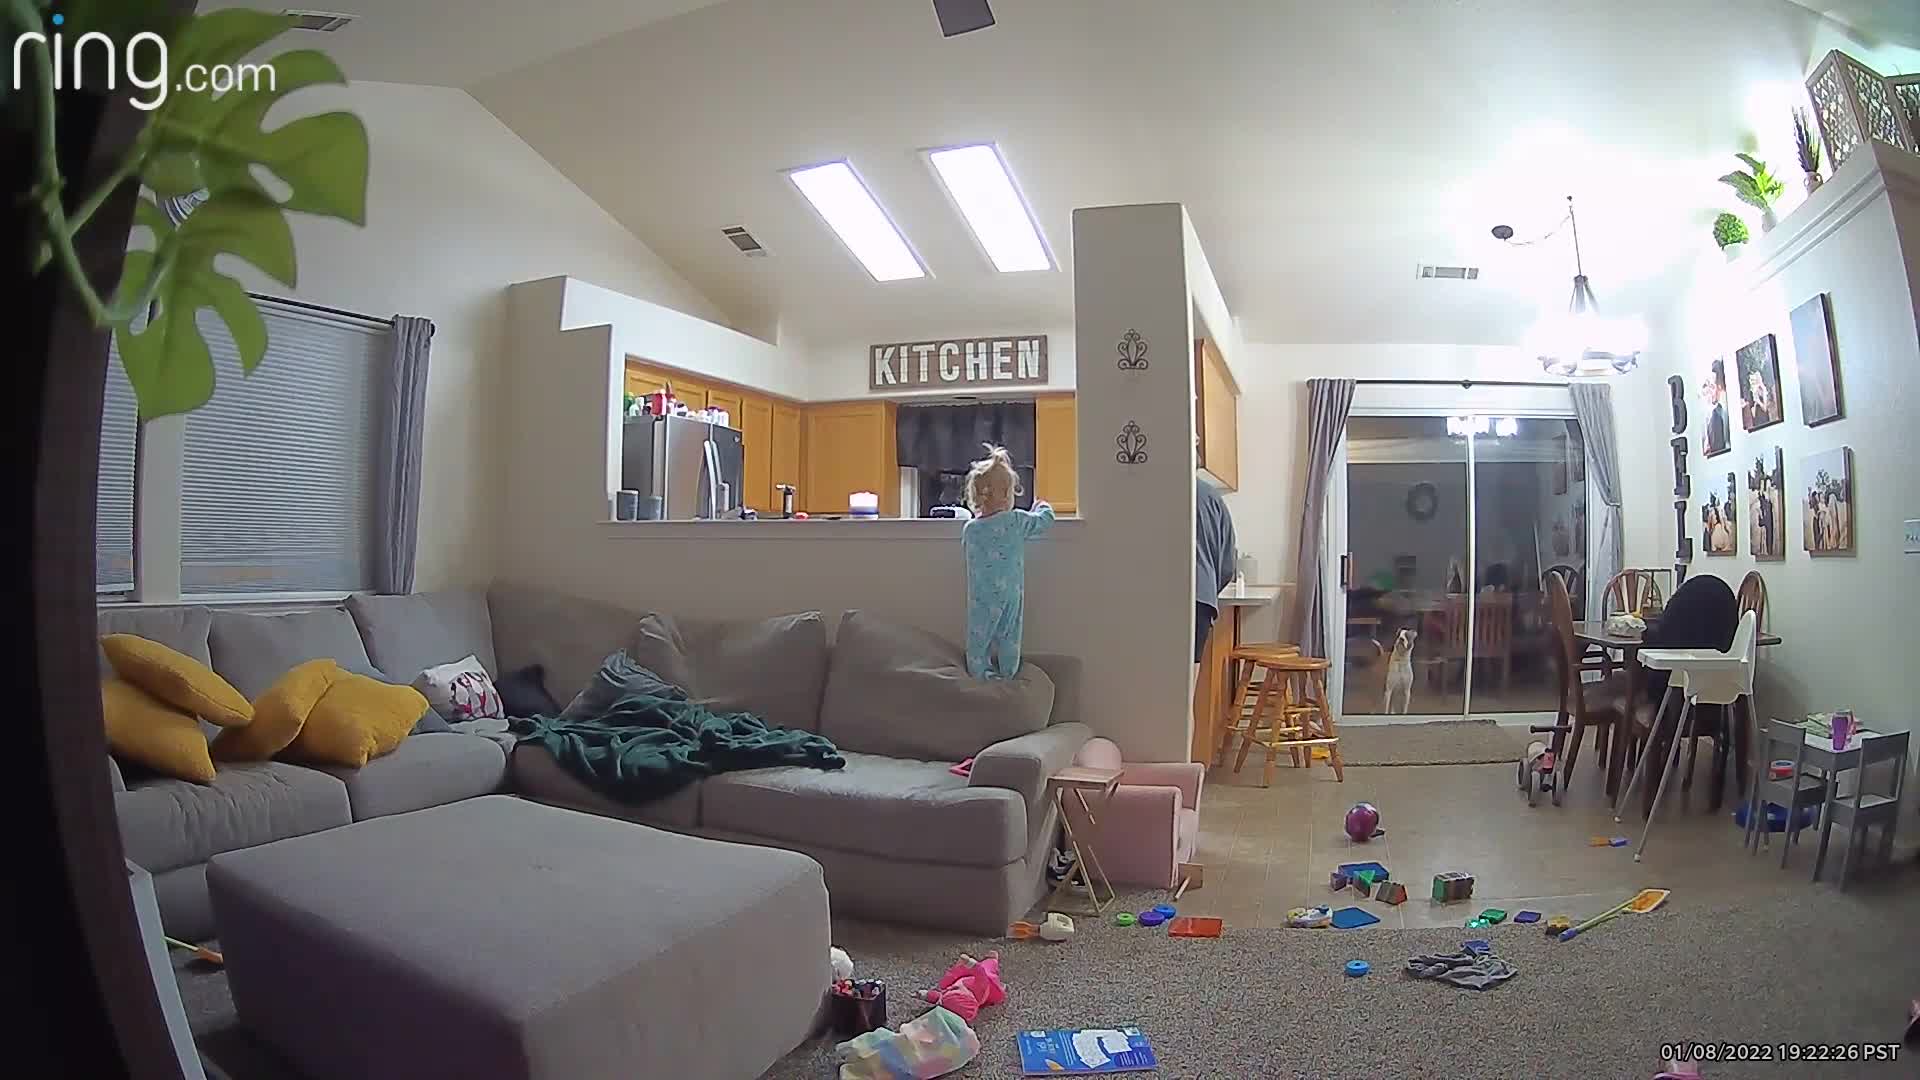 Little girl stands on top of couch then falls off and faceplants on the floor (Security camera) - LiveGore.com 